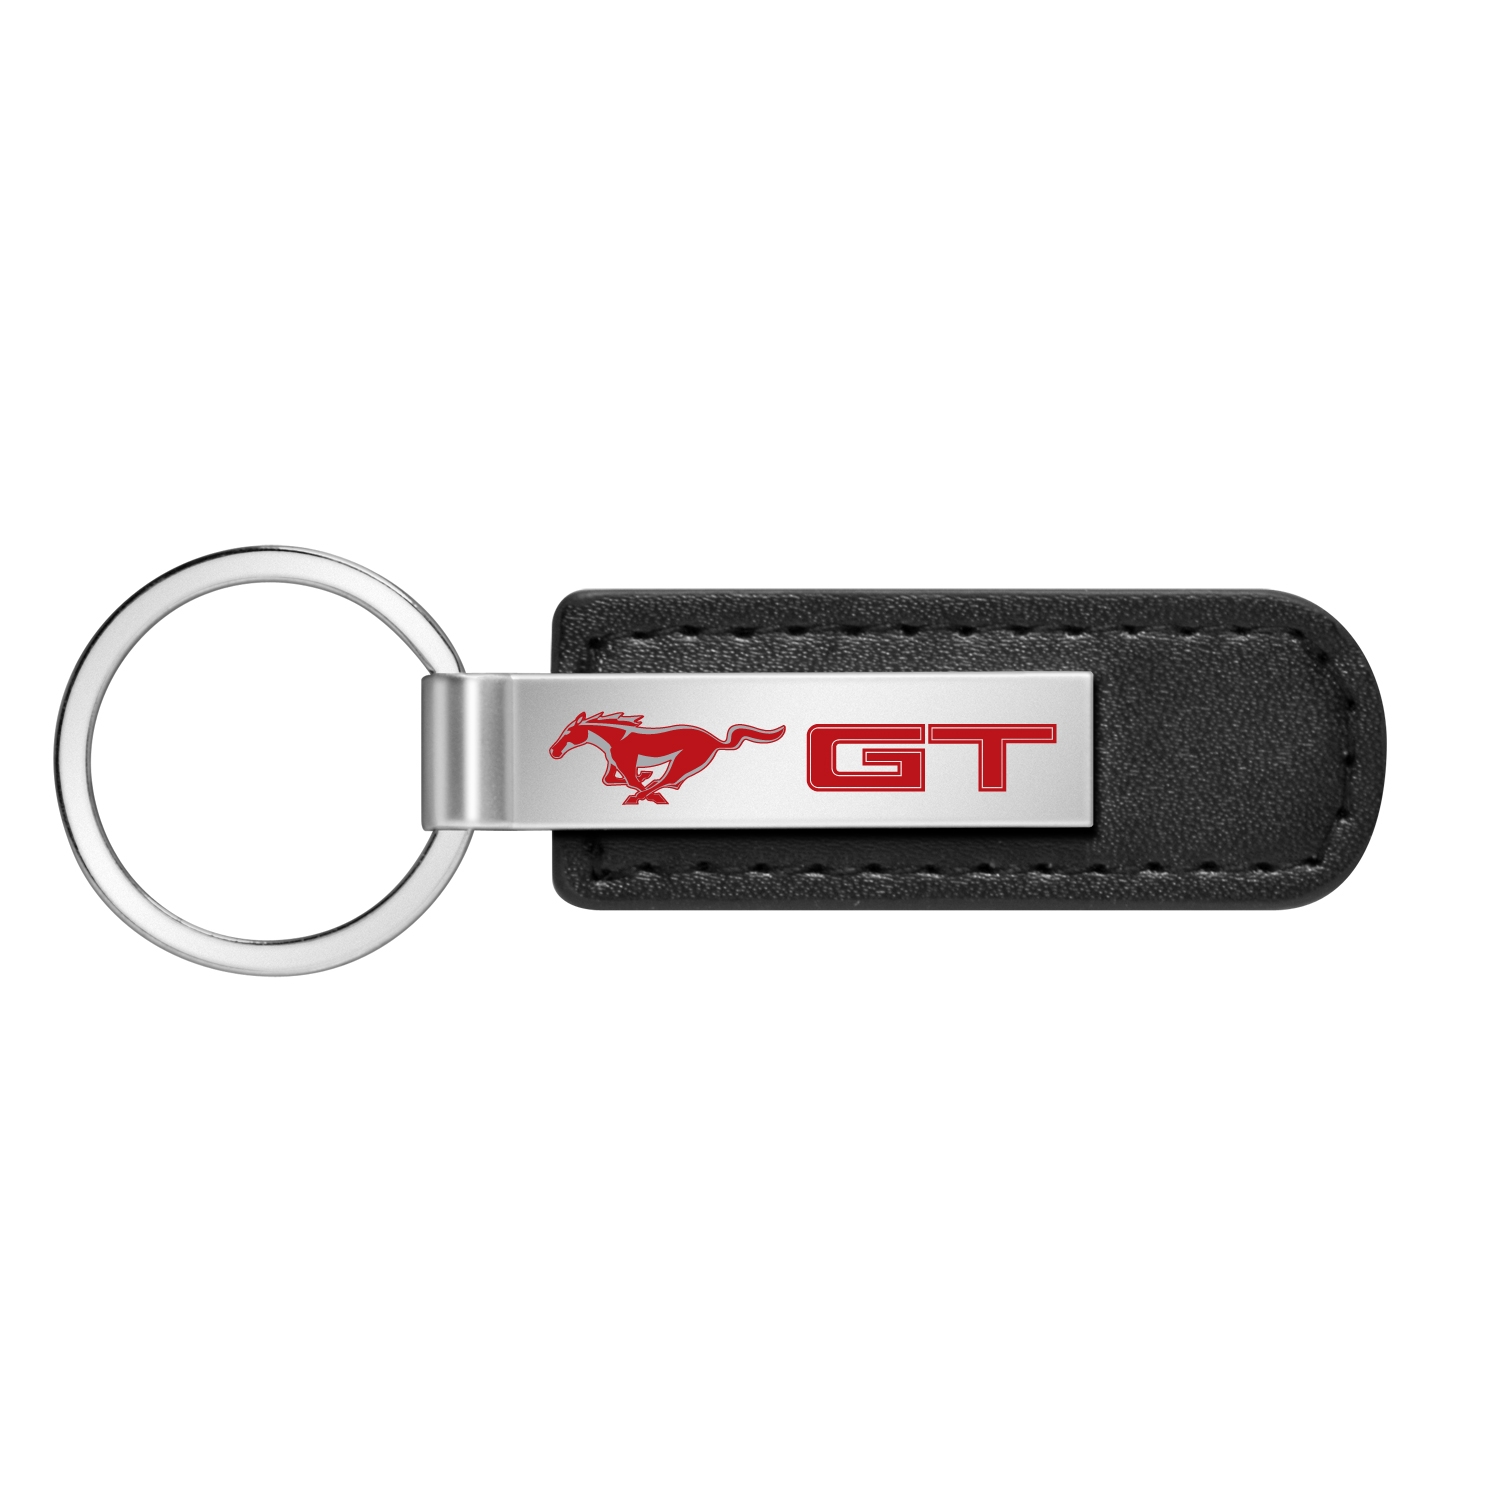 Ford Mustang GT in Red Black Leather Strap Key Chain